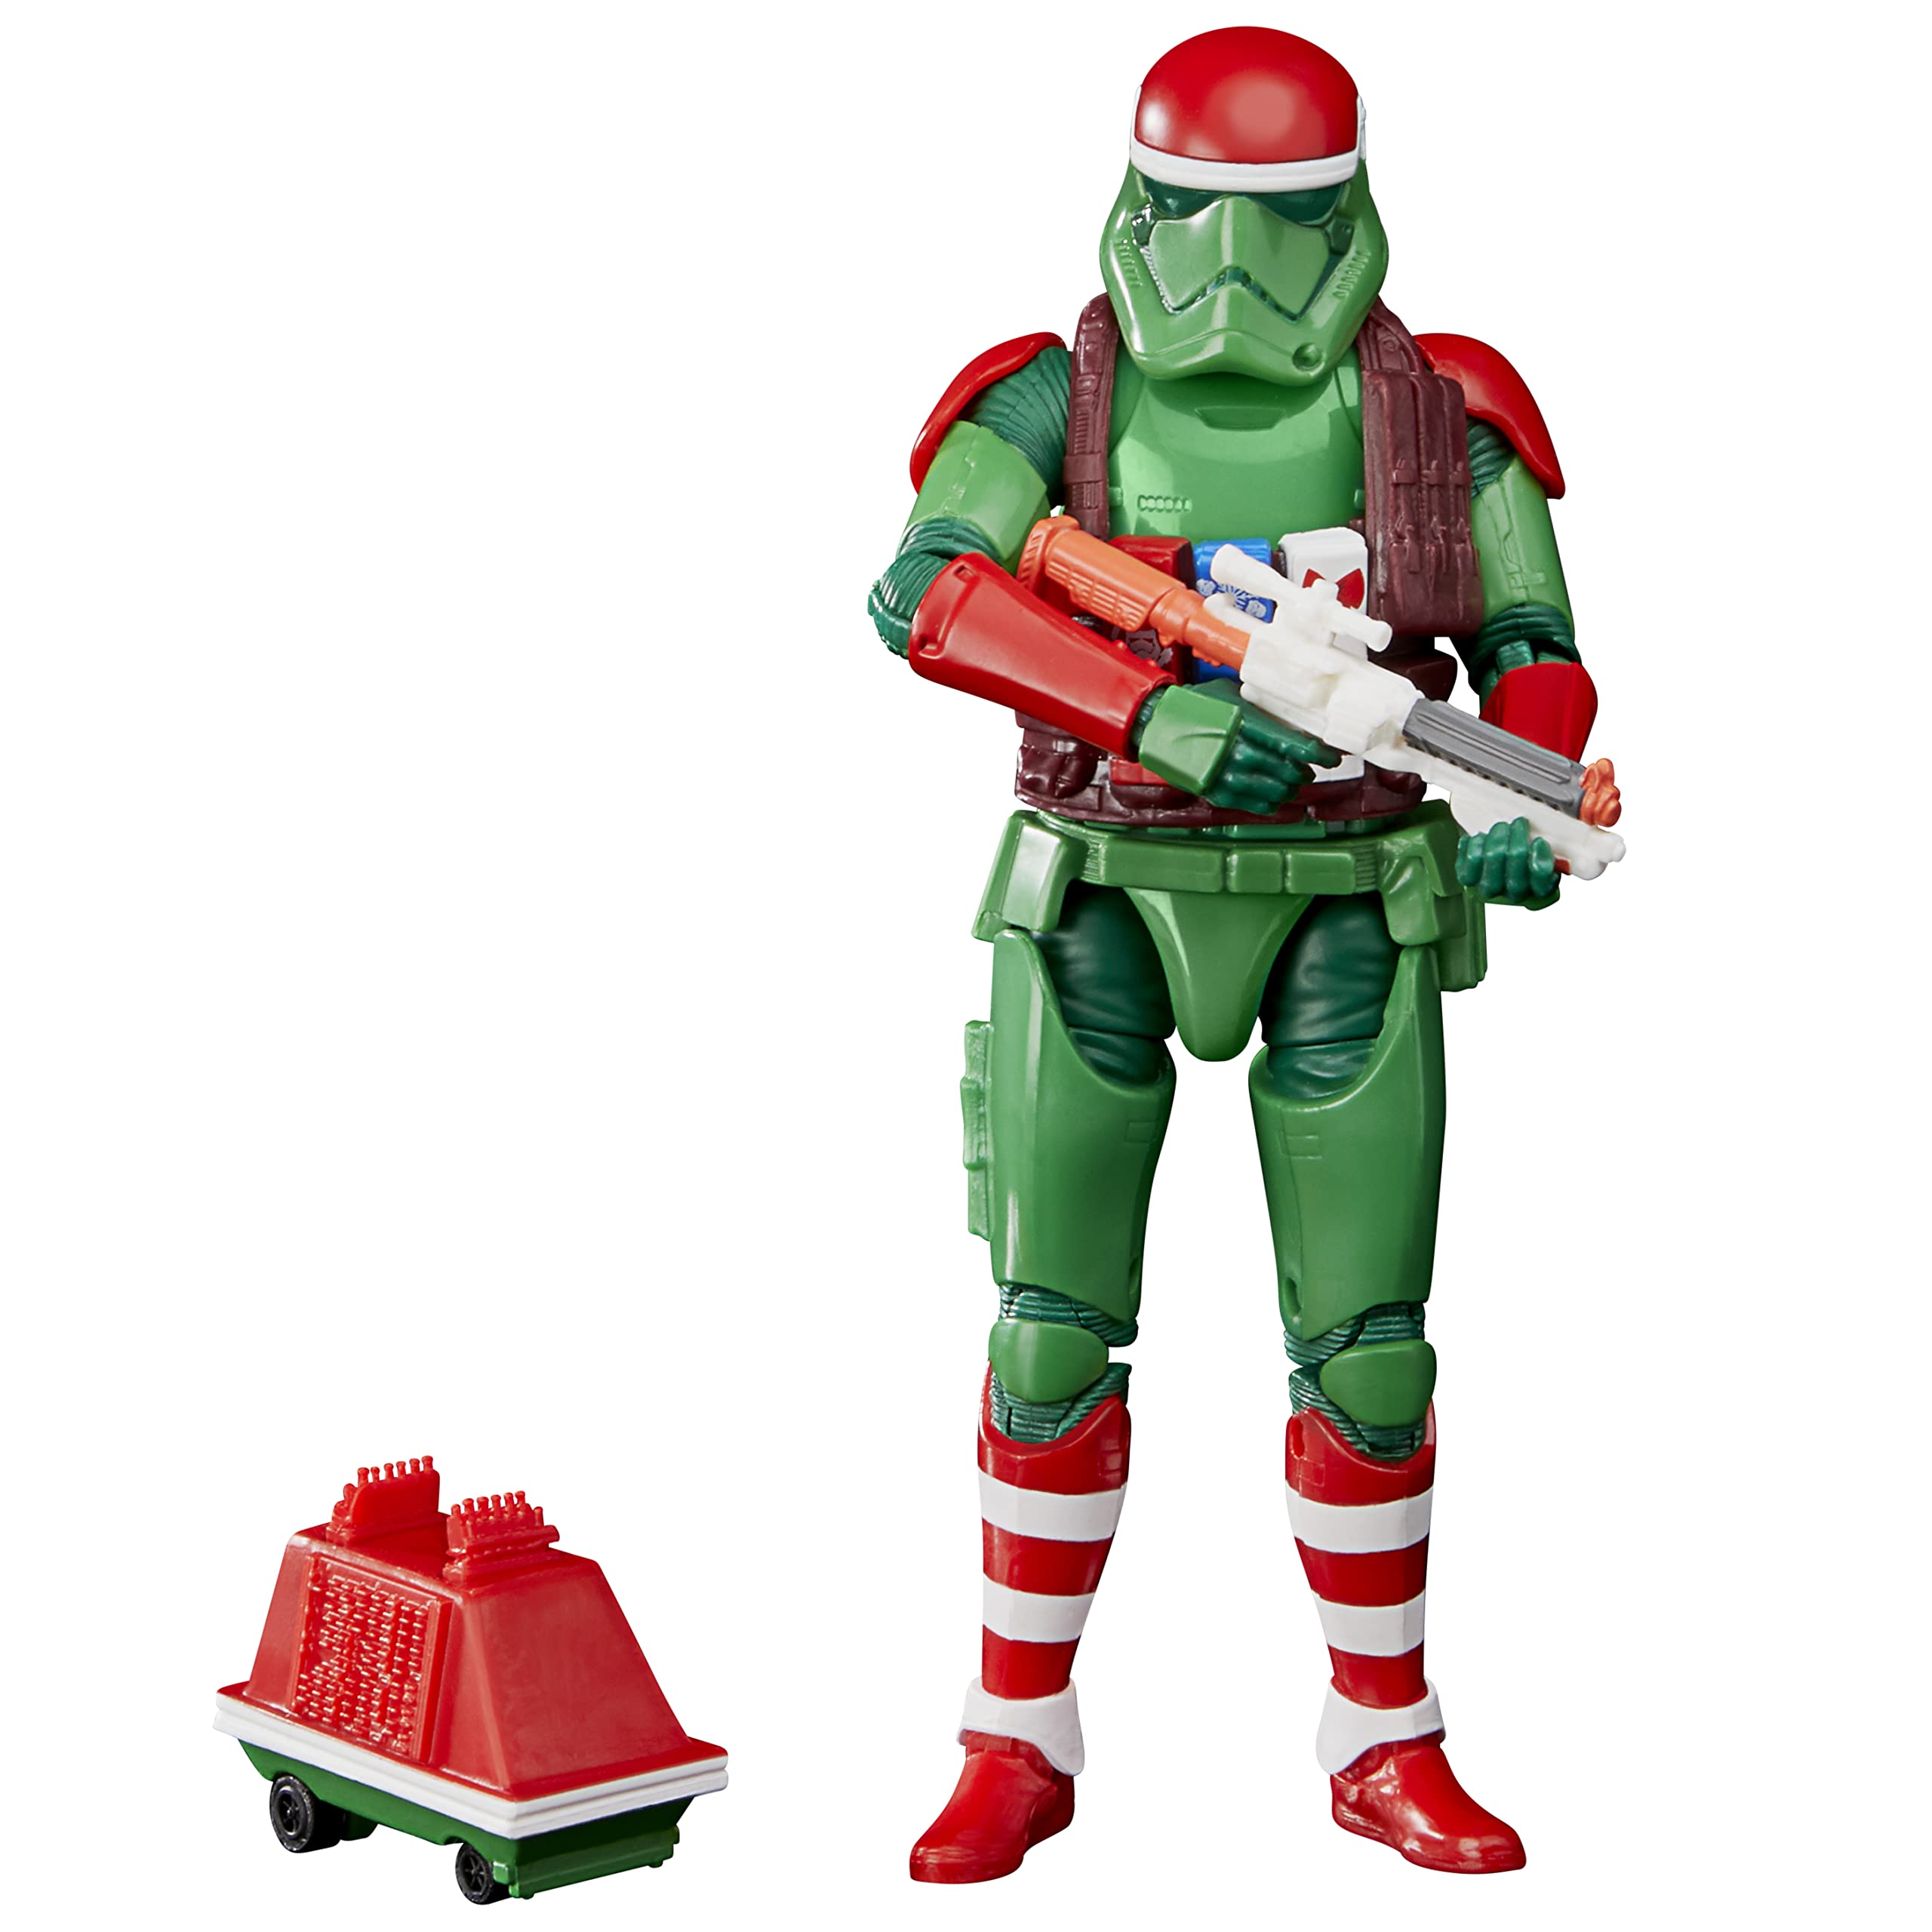 STAR WARS The Black Series First Order Stormtrooper (Holiday Edition) and Mouse Droid Toys, 6-Inch-Scale Holiday-Themed Collectible Figures (Amazon Exclusive)